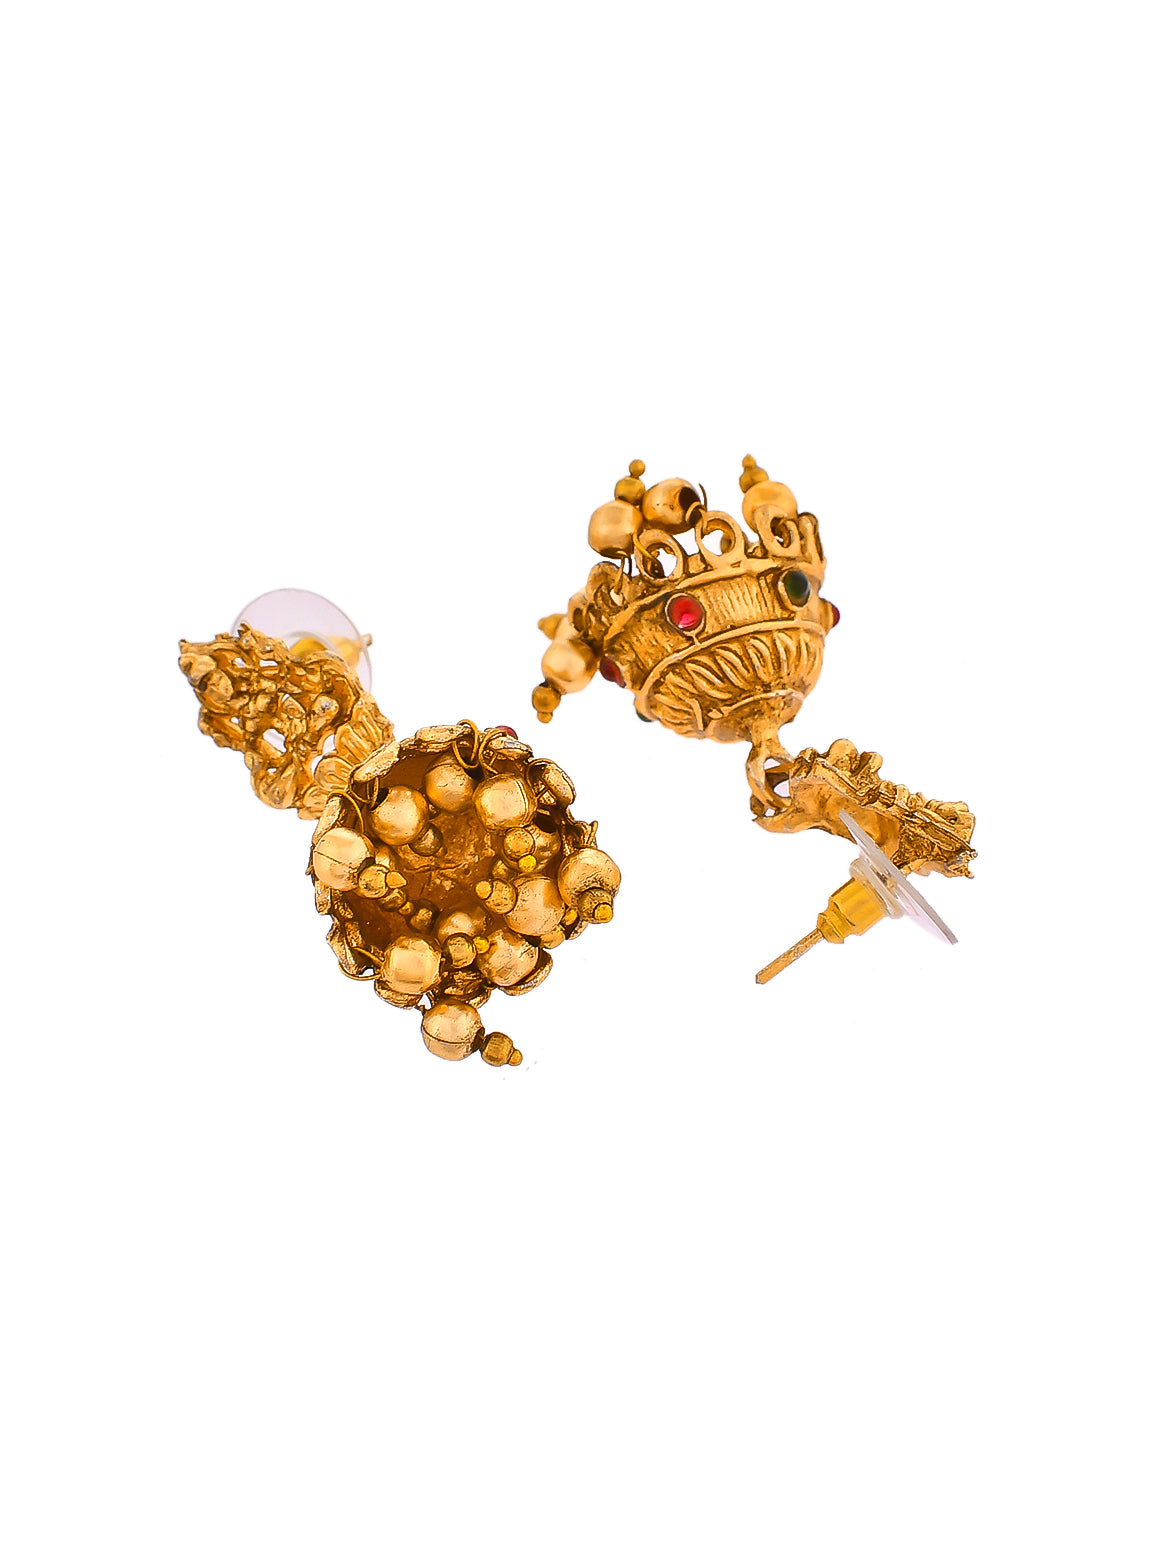 Gold Plated Heavy Long Temple Jewellery Set